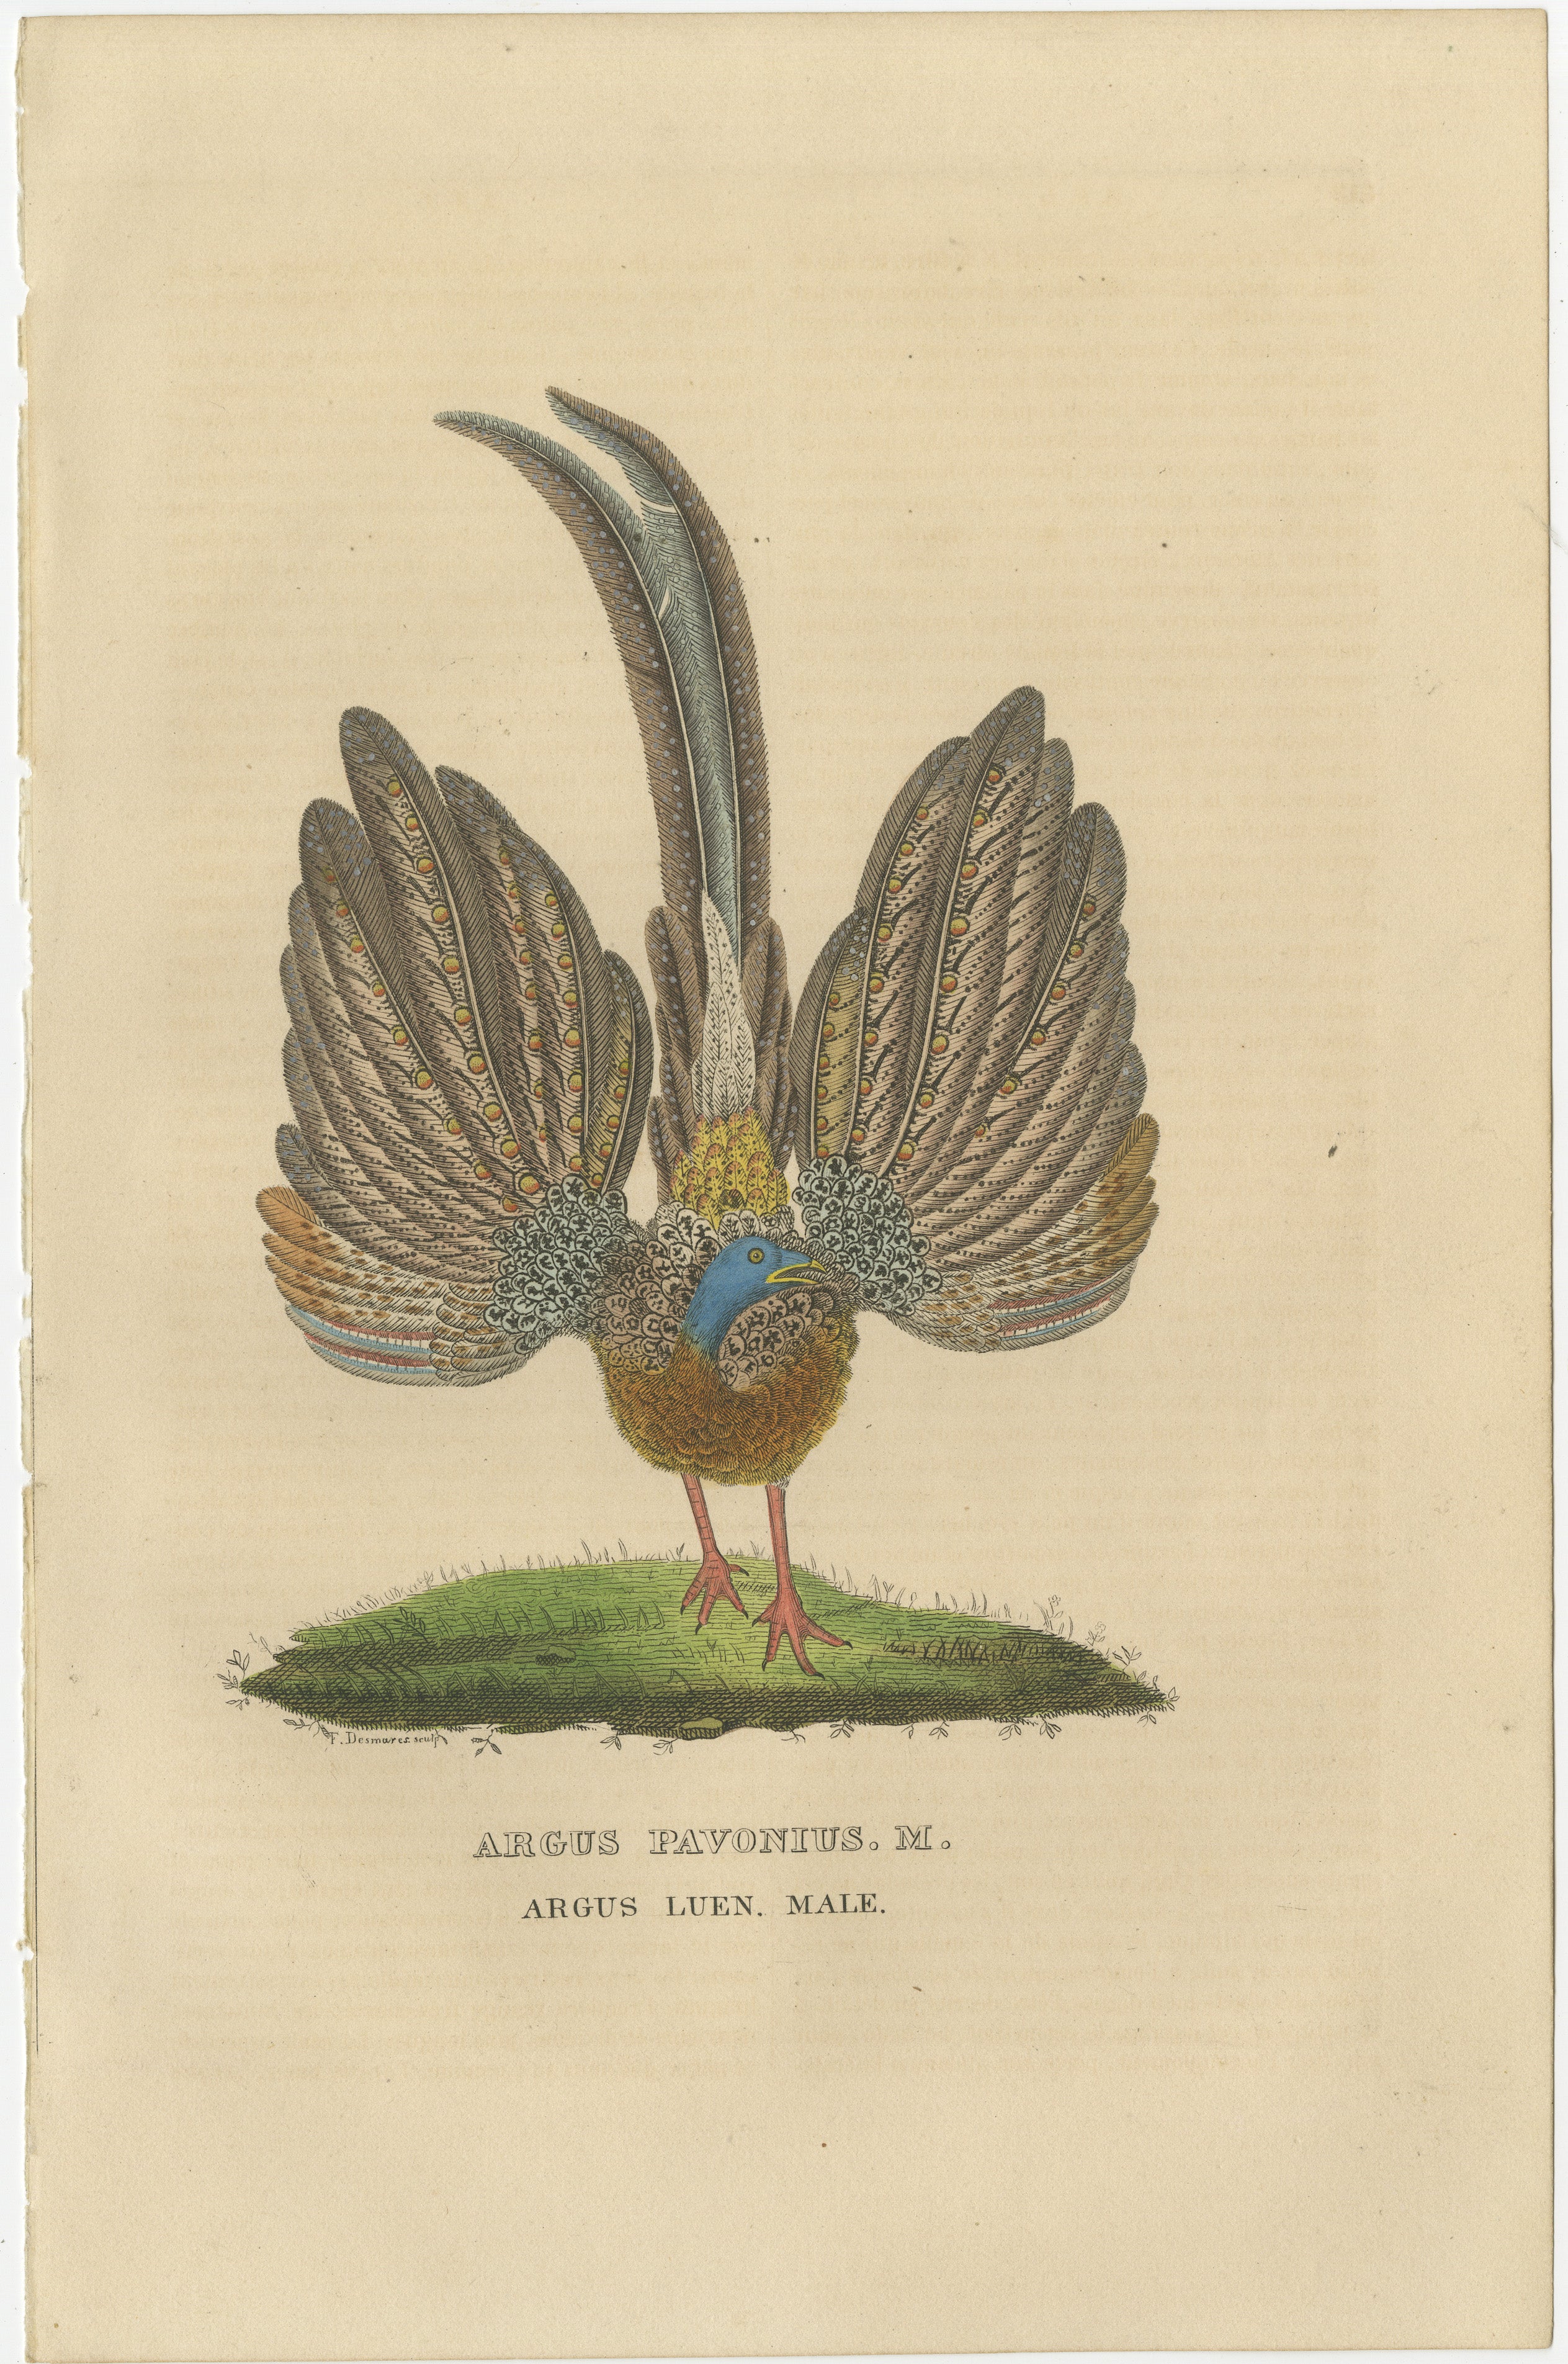 Antique Print-ARGUS-PHEASANT-Buffon-1839

Engraving with original hand colouring, heightened with arabic gum on wove (vellin) paper.

More info on the book in which it was published:

The 'Dictionnaire Classique des Sciences Naturelles' by Pierre